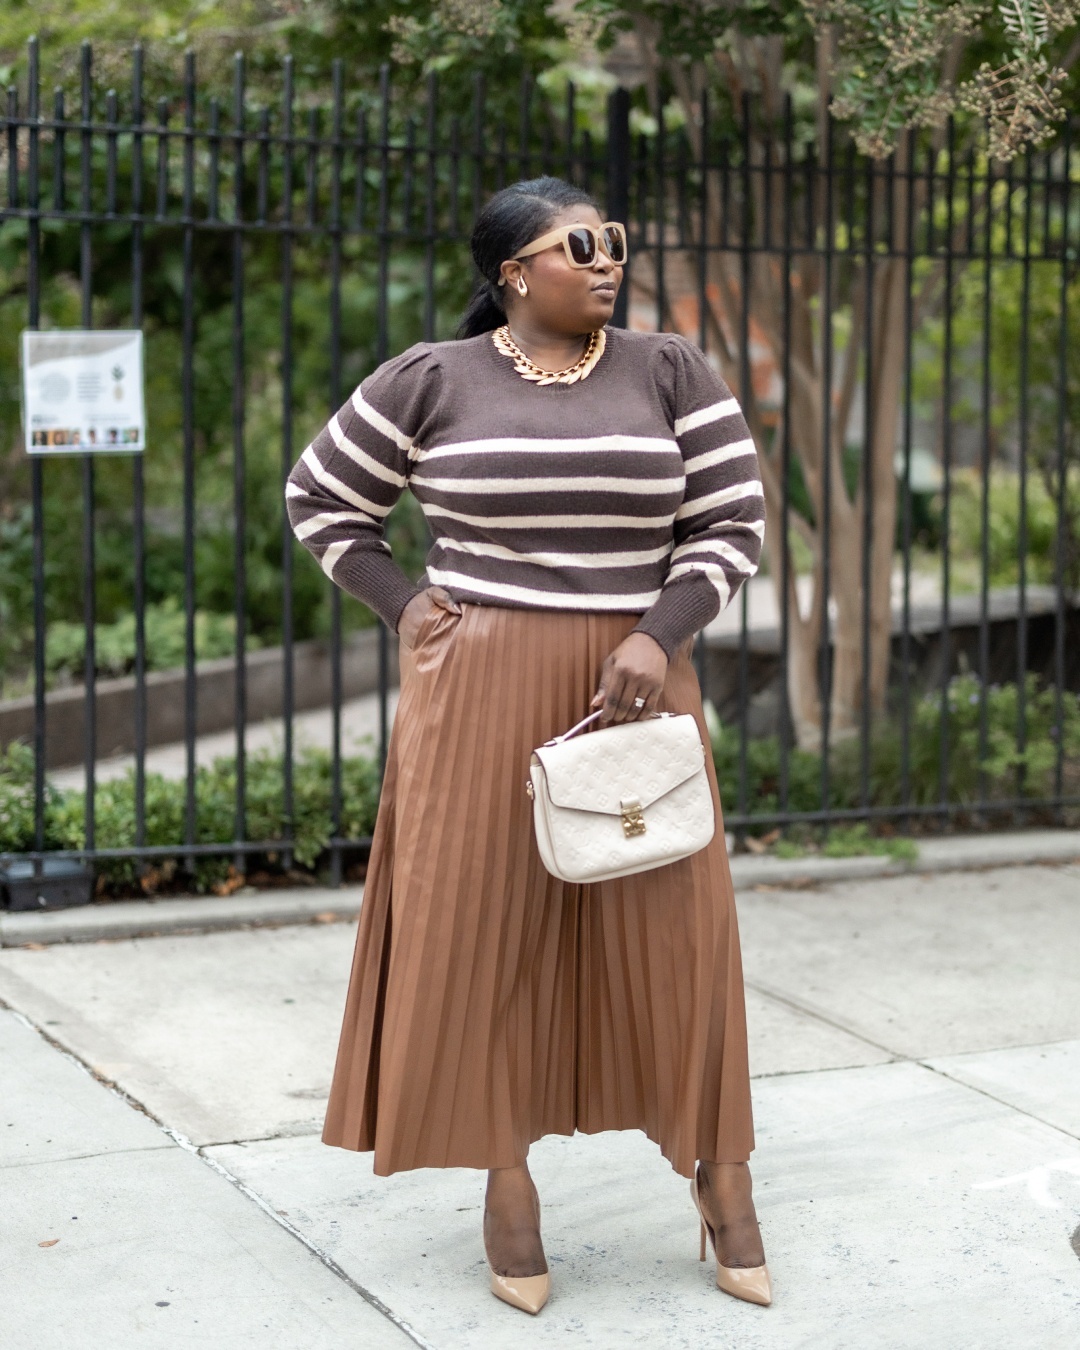 Leather pleated midi skirt and striped sweater